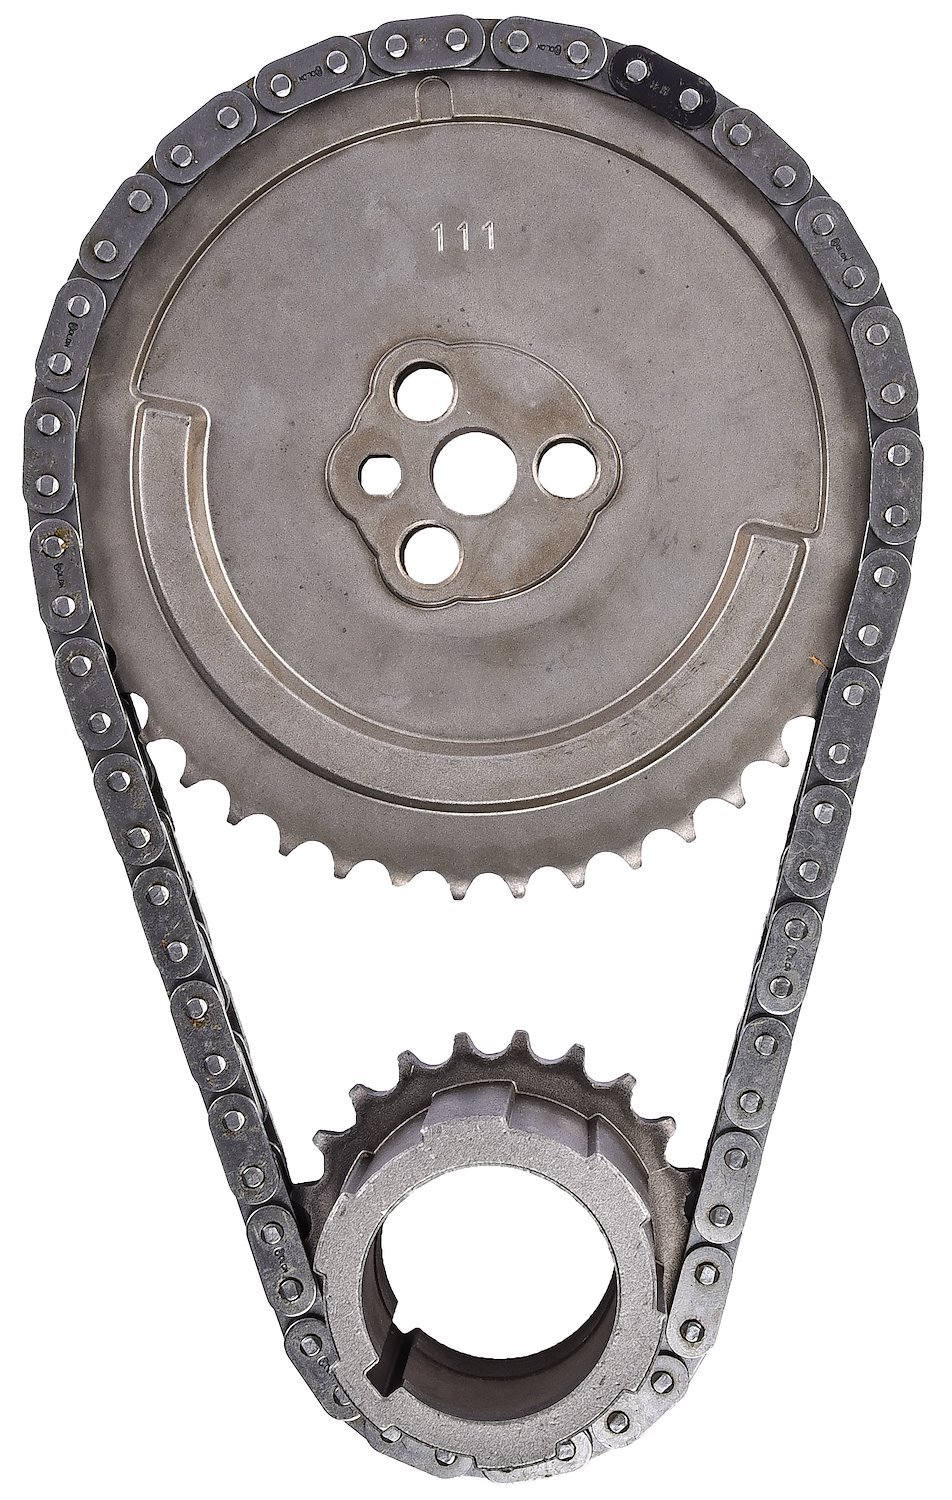 Timing Chain Set for 1997-2007 GM LS Gen